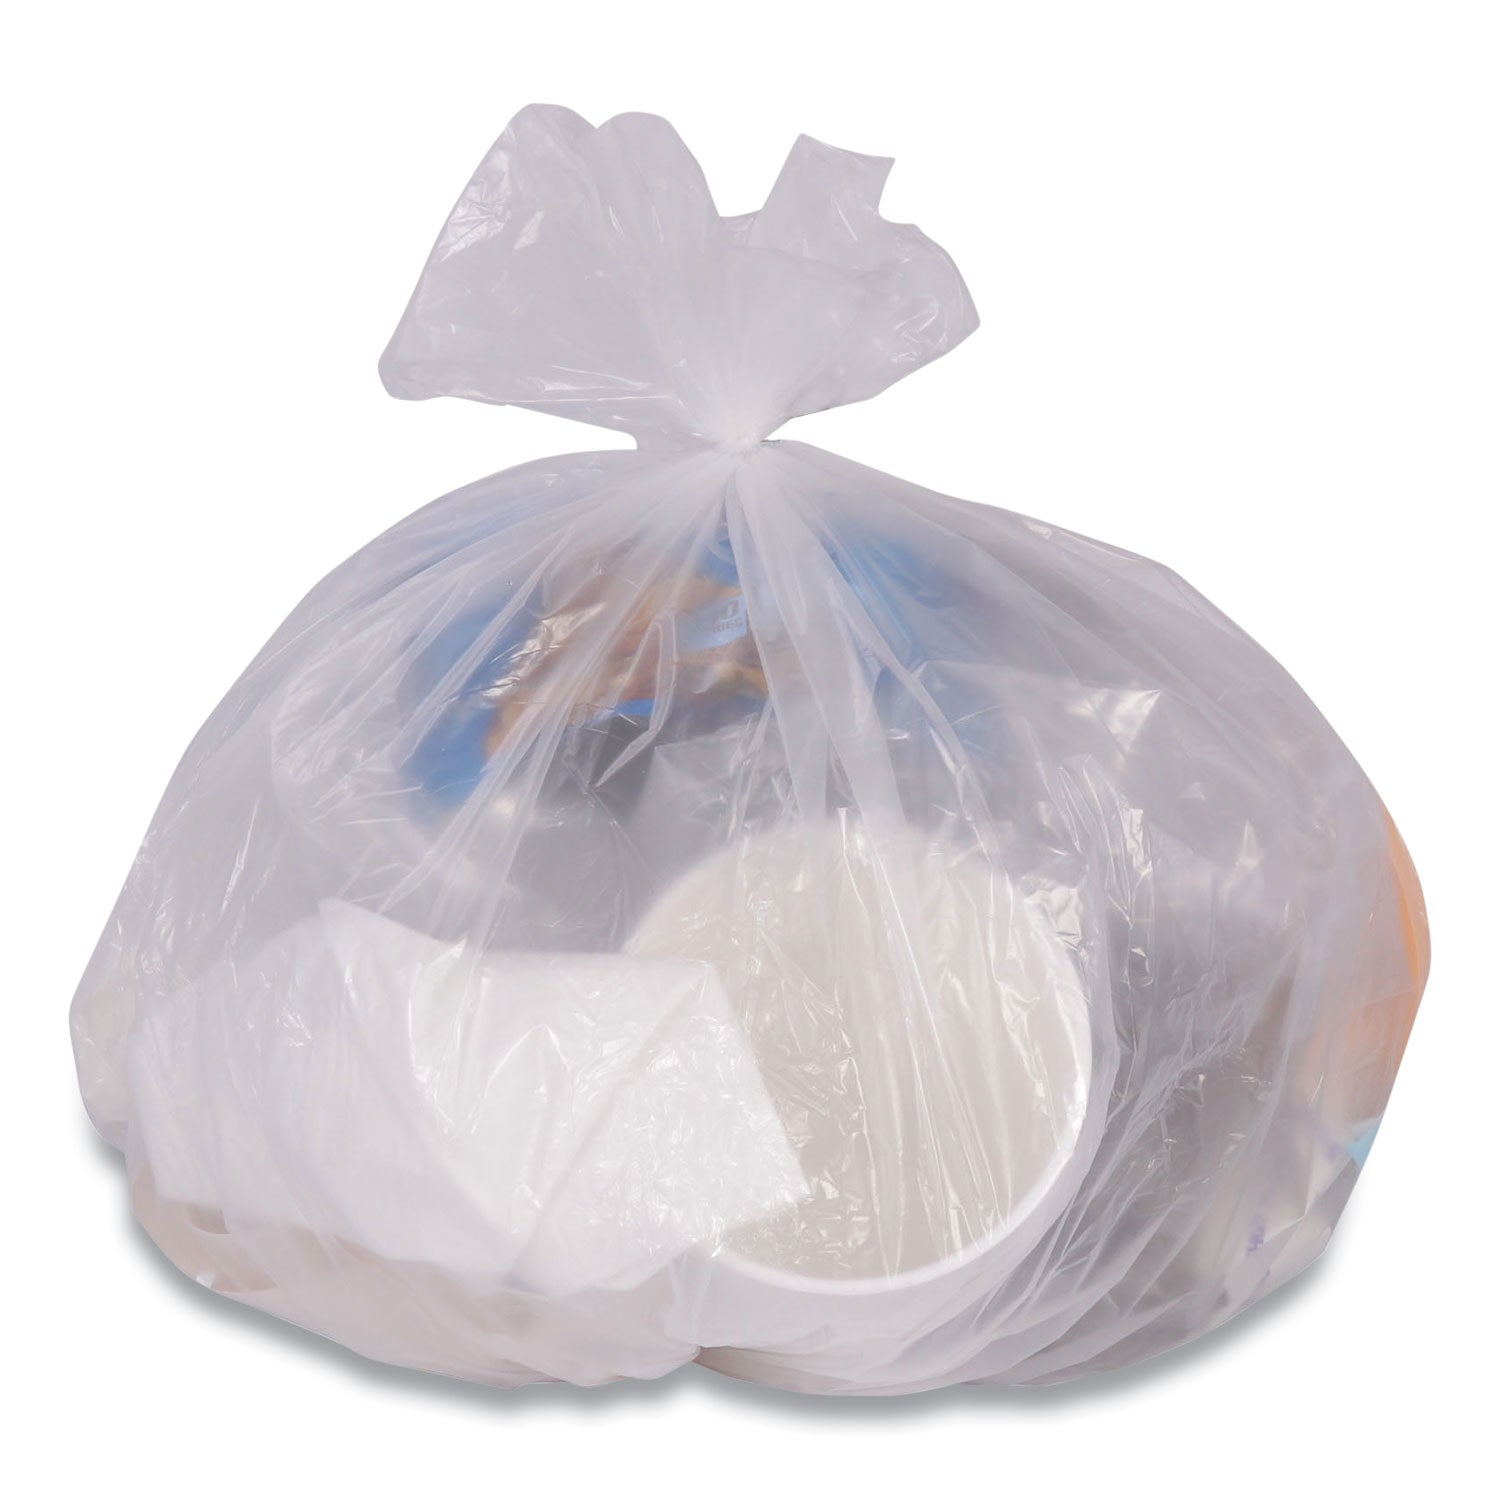 high-density-can-liners-10-gal-6-mic-24-x-24-clear-50-bags-roll-20-rolls-carton_cwz814902 - 1